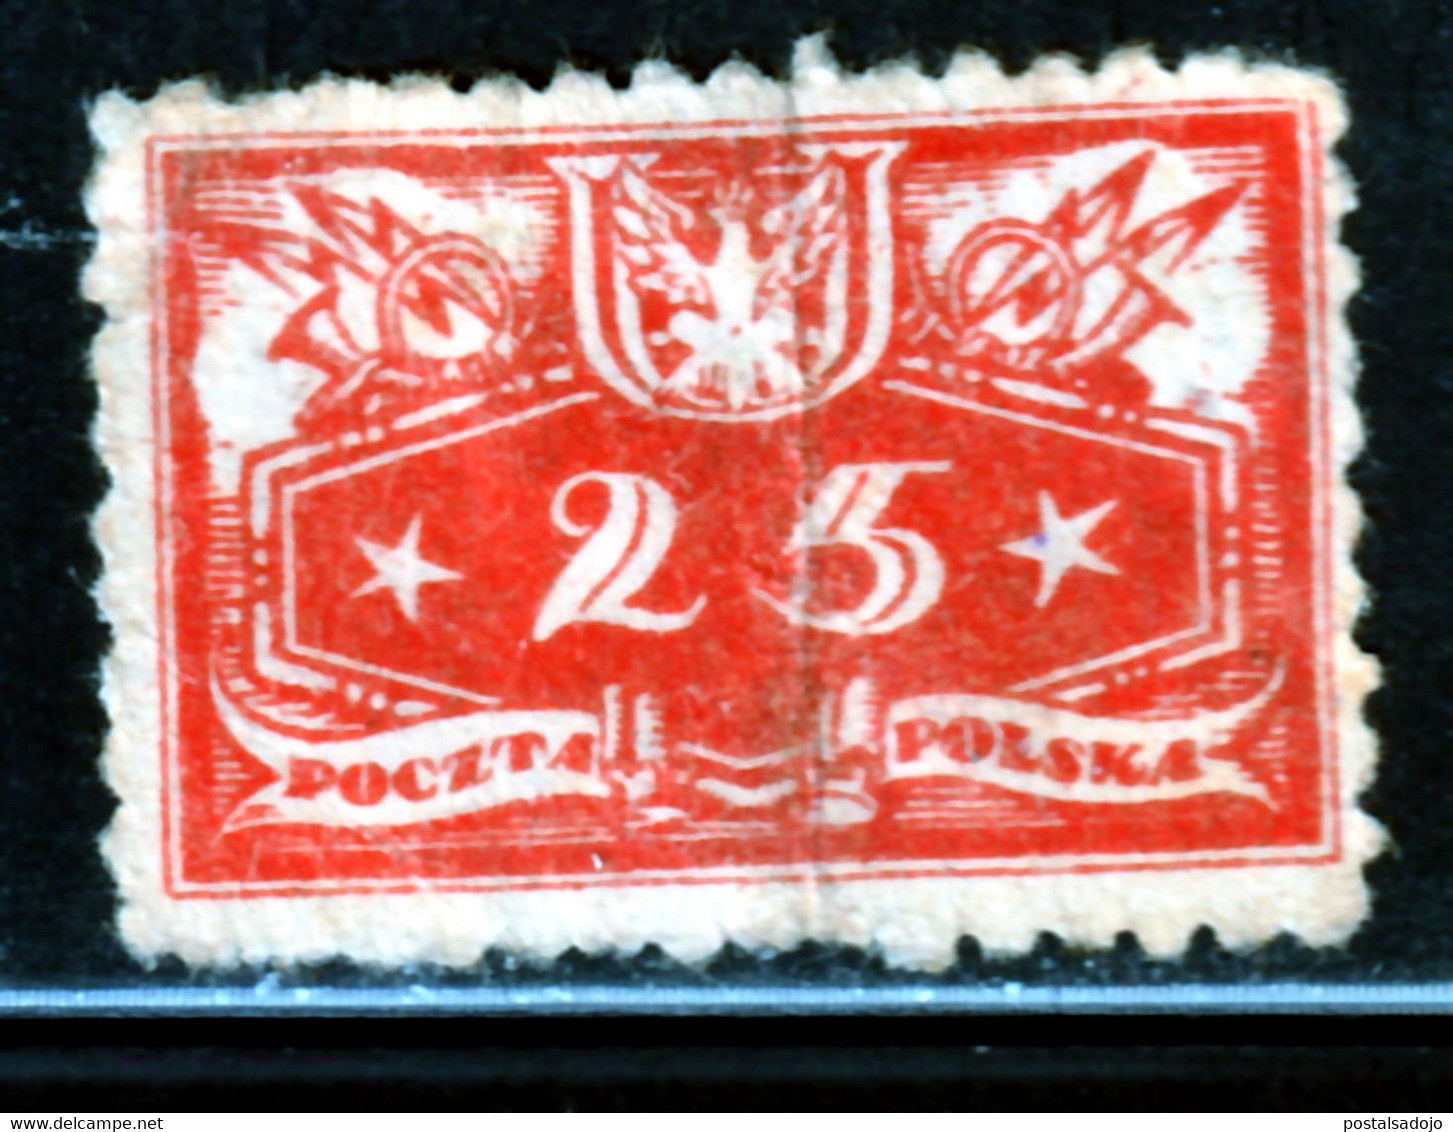 POLOGNE 487 // YVERT  5, SERVICE // 1920. - Postage Due